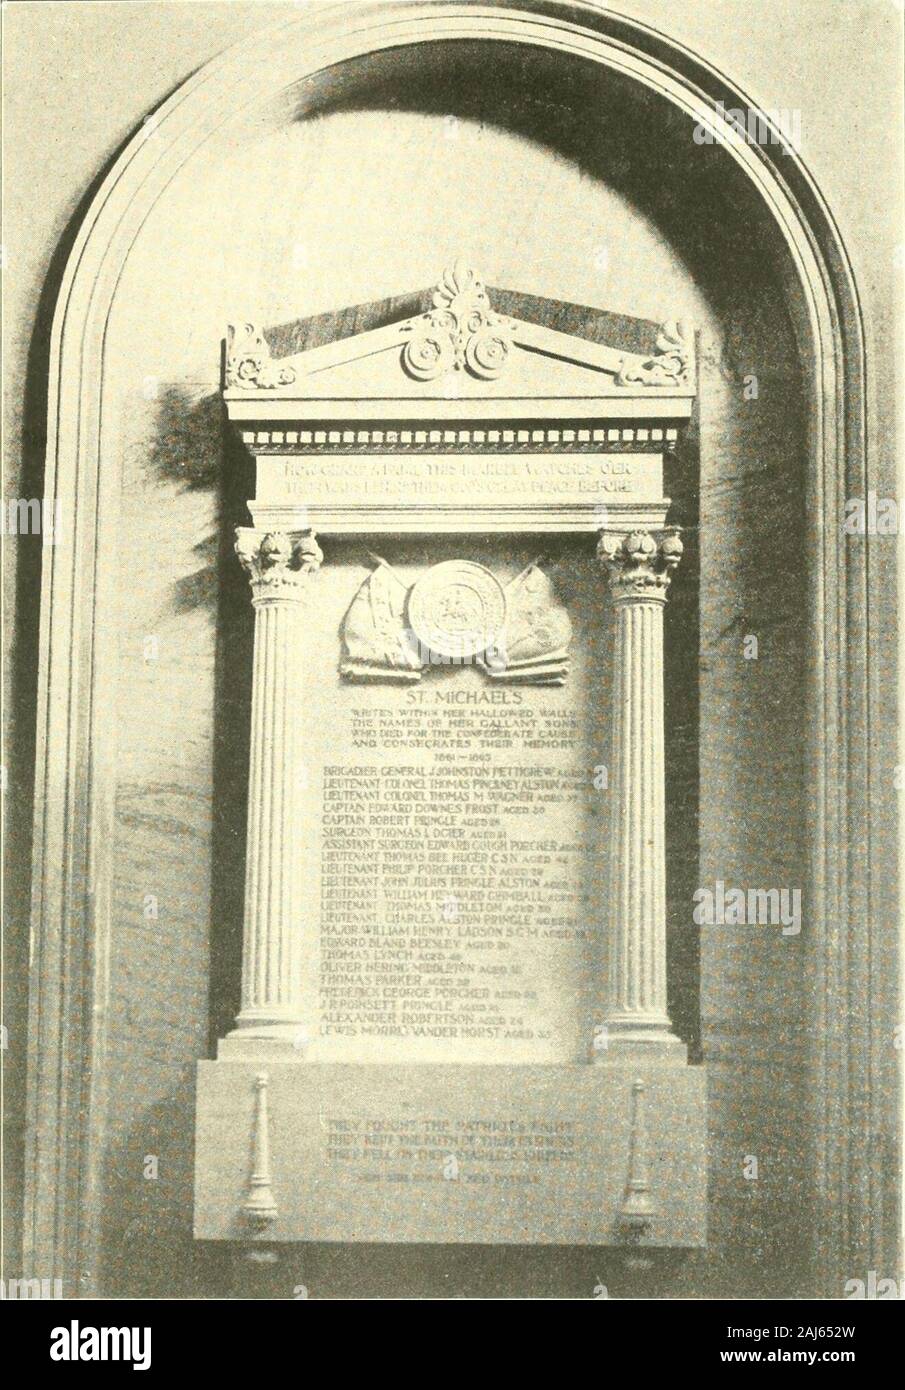 Inscriptions on the tablets and gravestones in St Michael's church and churchyard, Charleston, S.C., to which is added from the church records a list of interments of persons to whom there are no stones . consecrates their memory 1861-1865. Brigadier General J. Johnston Pettigrew aged 35 Lieutenant Colonel Thomas Pinckney Alston aged 32 Lieutenant Colonel 1 homas M. Wagner aged 37 Captain Edward Downes Frost aged 30 Captain Robert Pringle aged 26 Surgeon Thomas L. Ogier aged 31 Assistant Surgeon Edward Gough Porcher aged 26 Lieutenant Thomas B. Huger C. S. N. aged 42 Lieutenant Philip Porcher Stock Photo